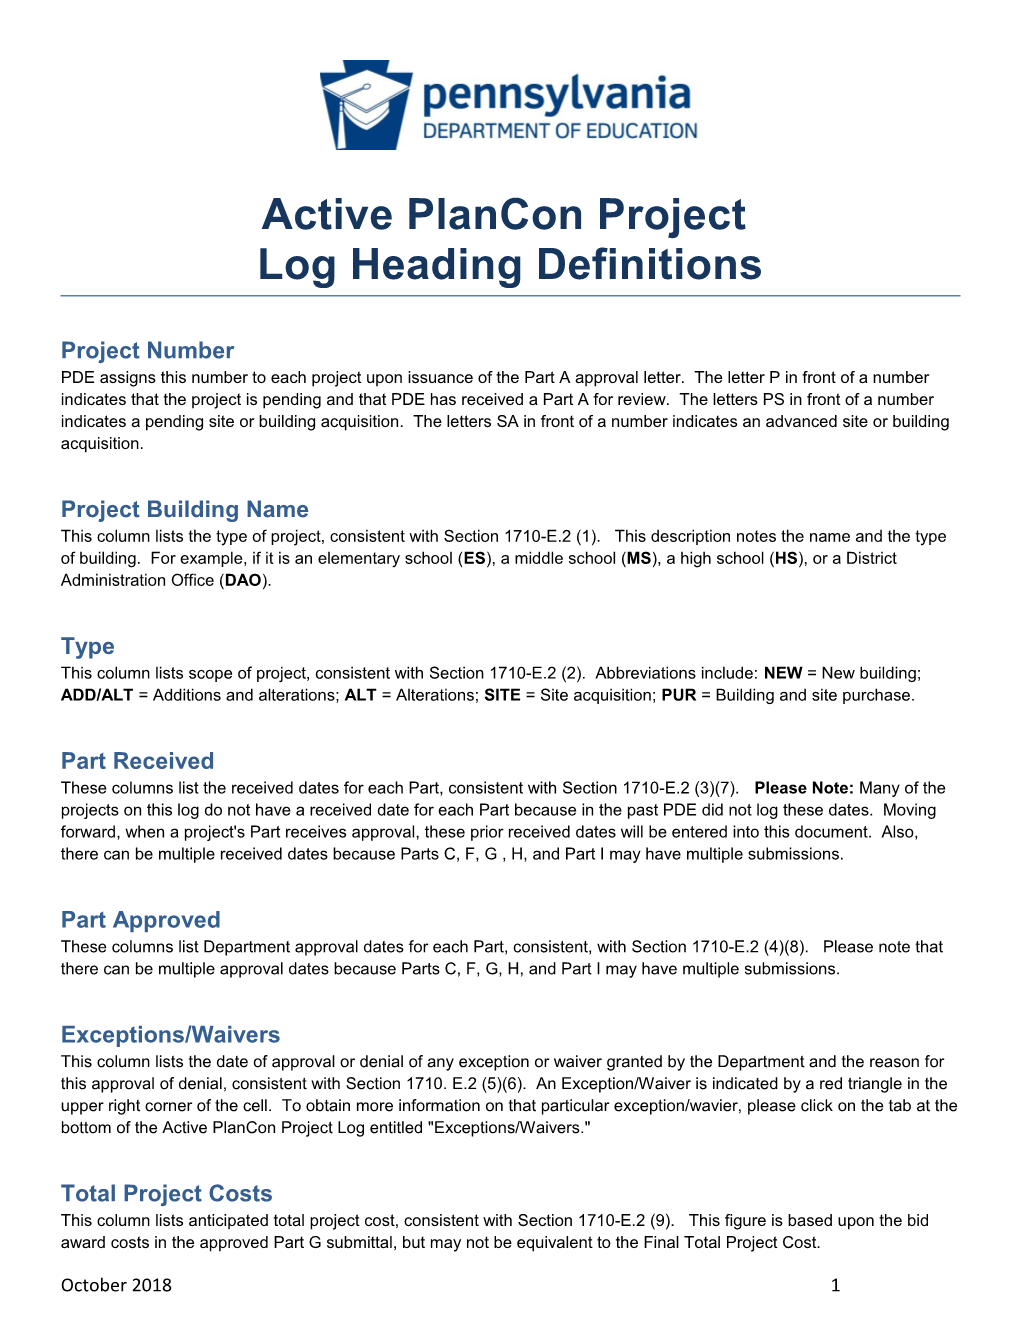 Active Plancon Project Log Heading Definitions